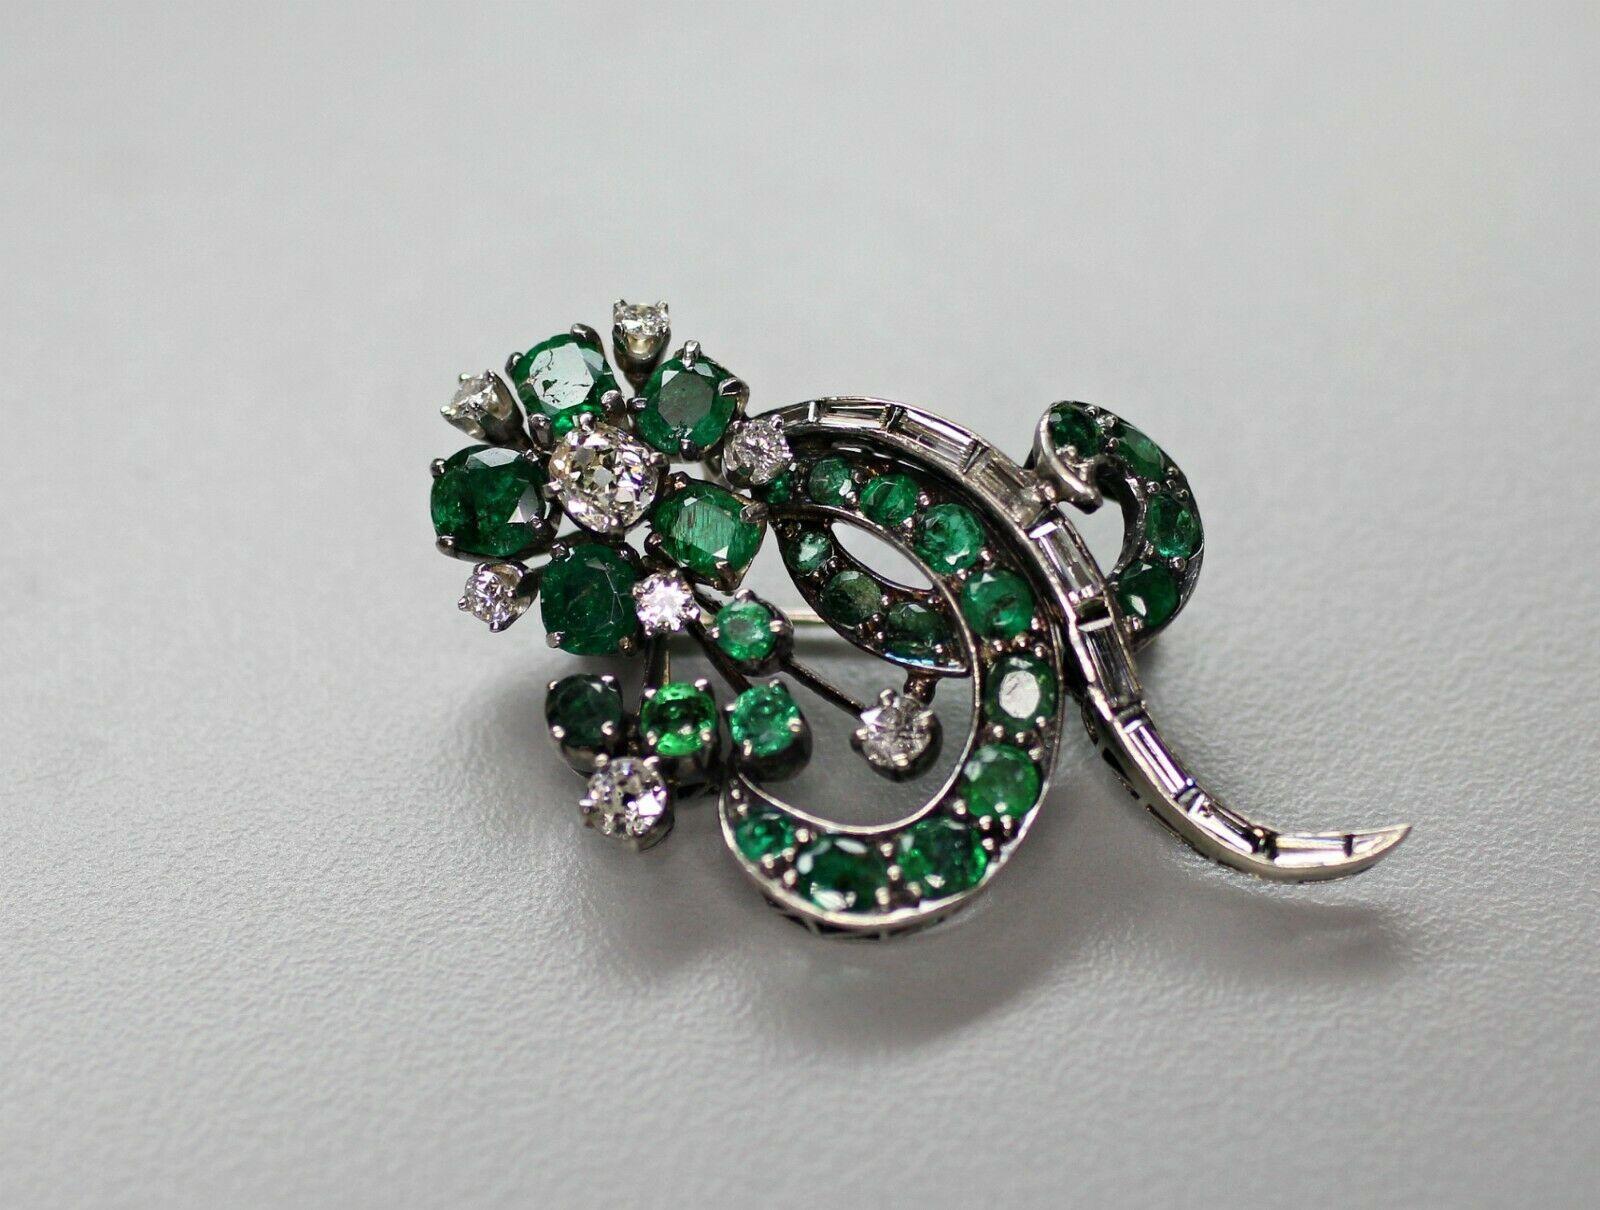 Women's or Men's 14 Karat White Gold Vintage Art Deco Style Emerald and Diamond Brooch For Sale